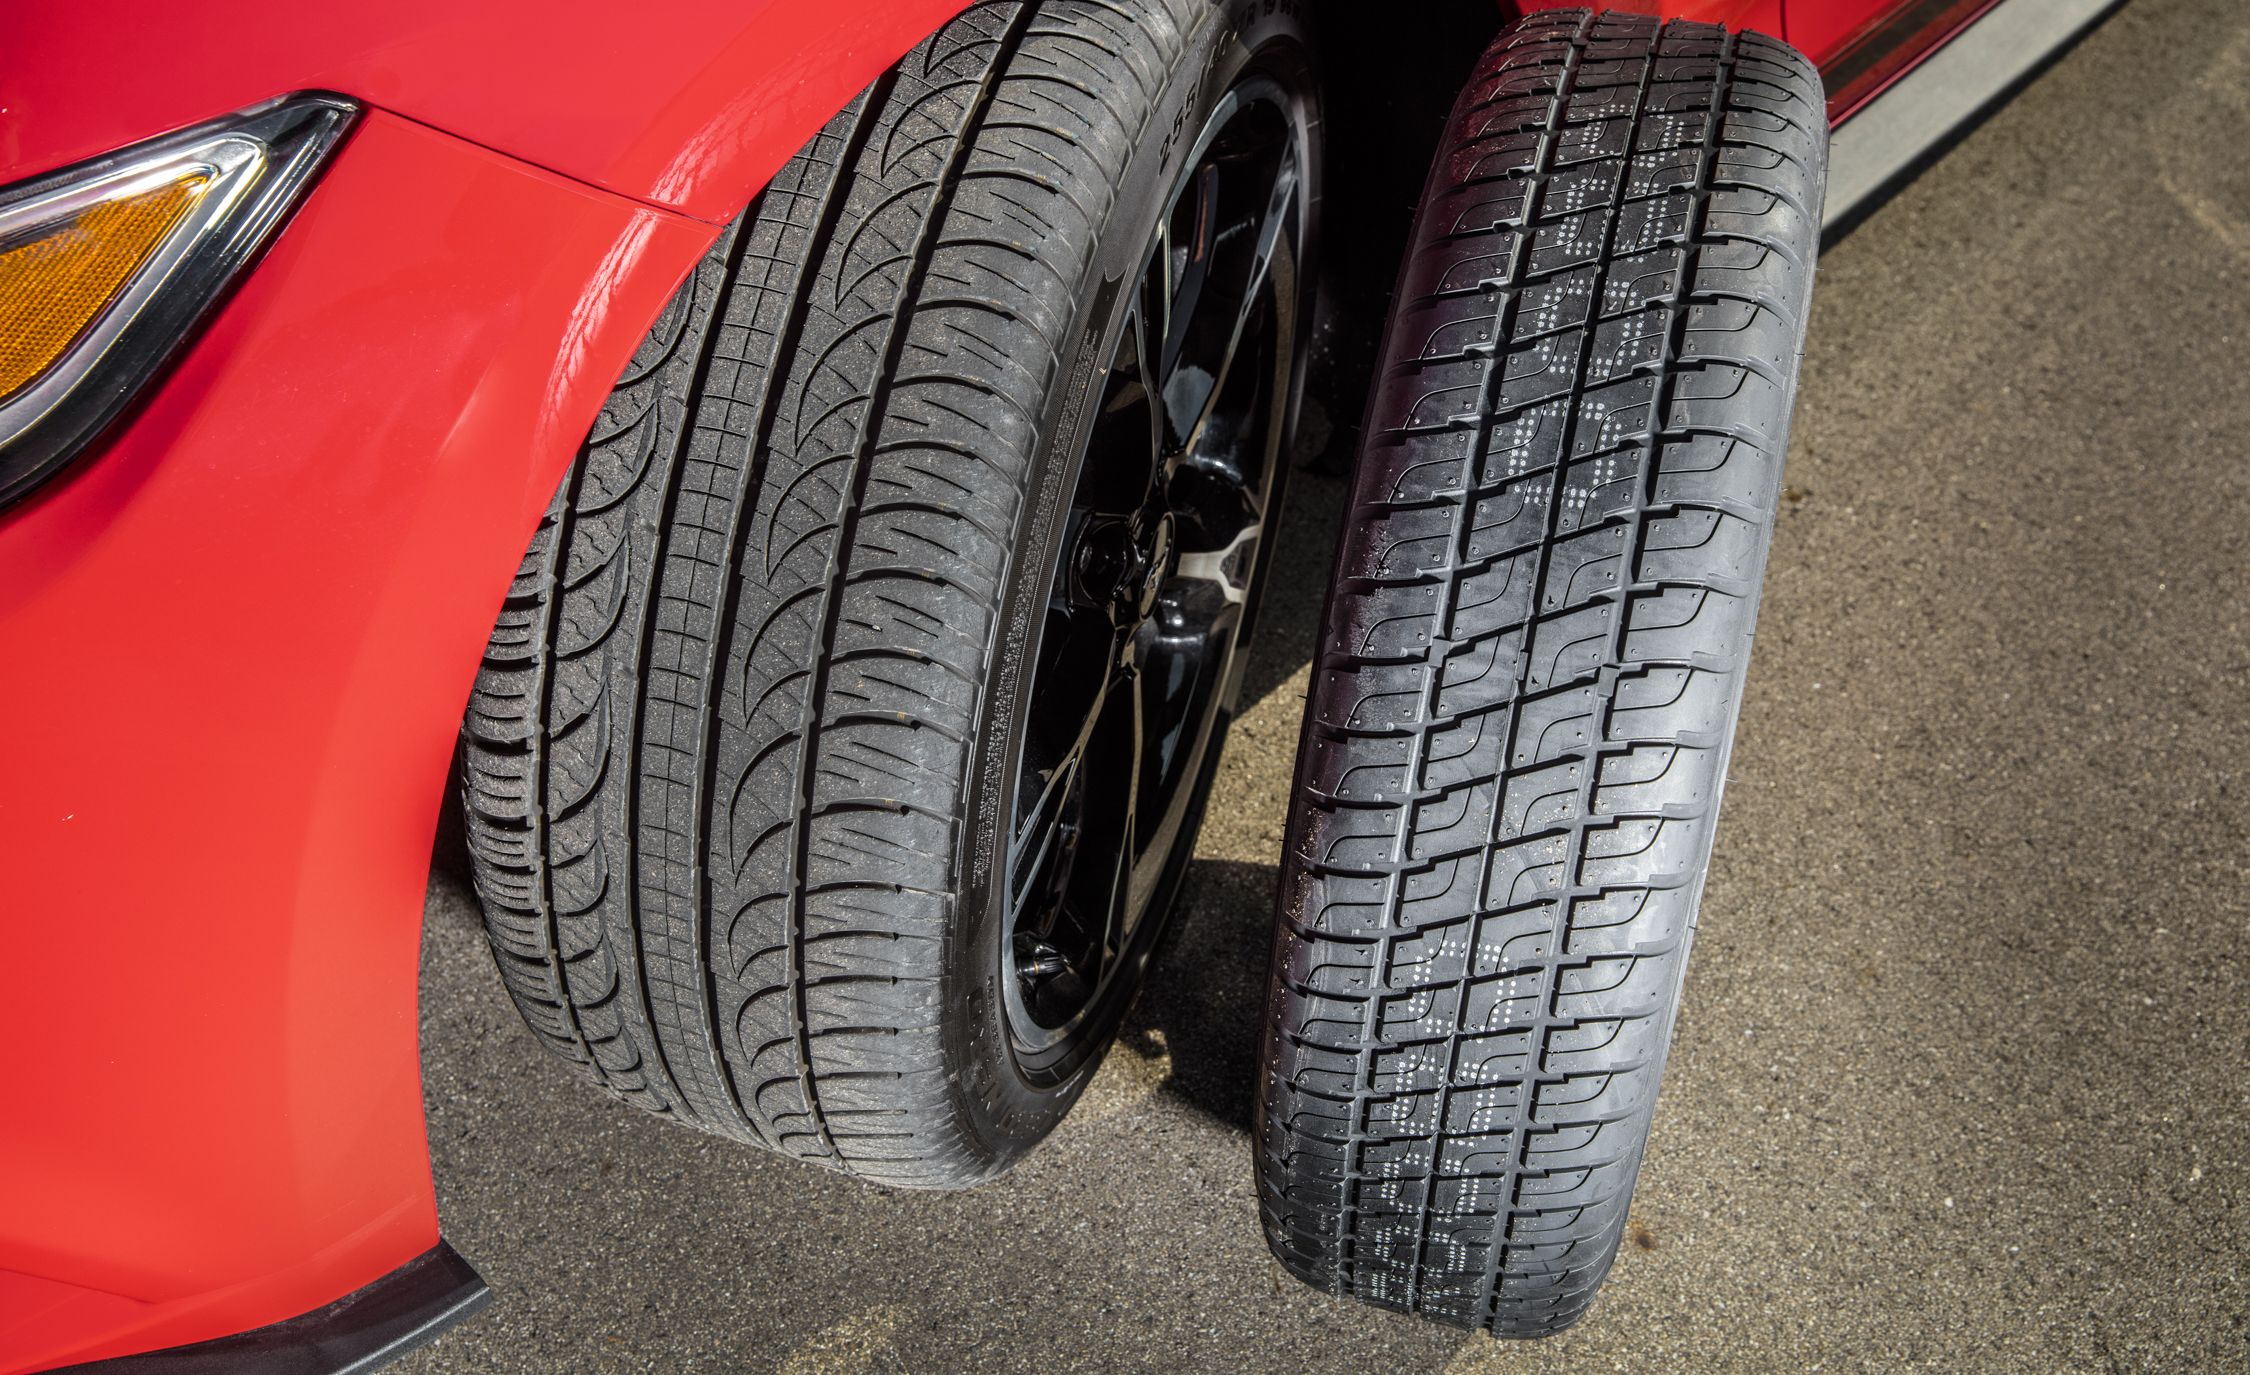 How Much Does a Space-Saver Spare Tire Limit Performance?